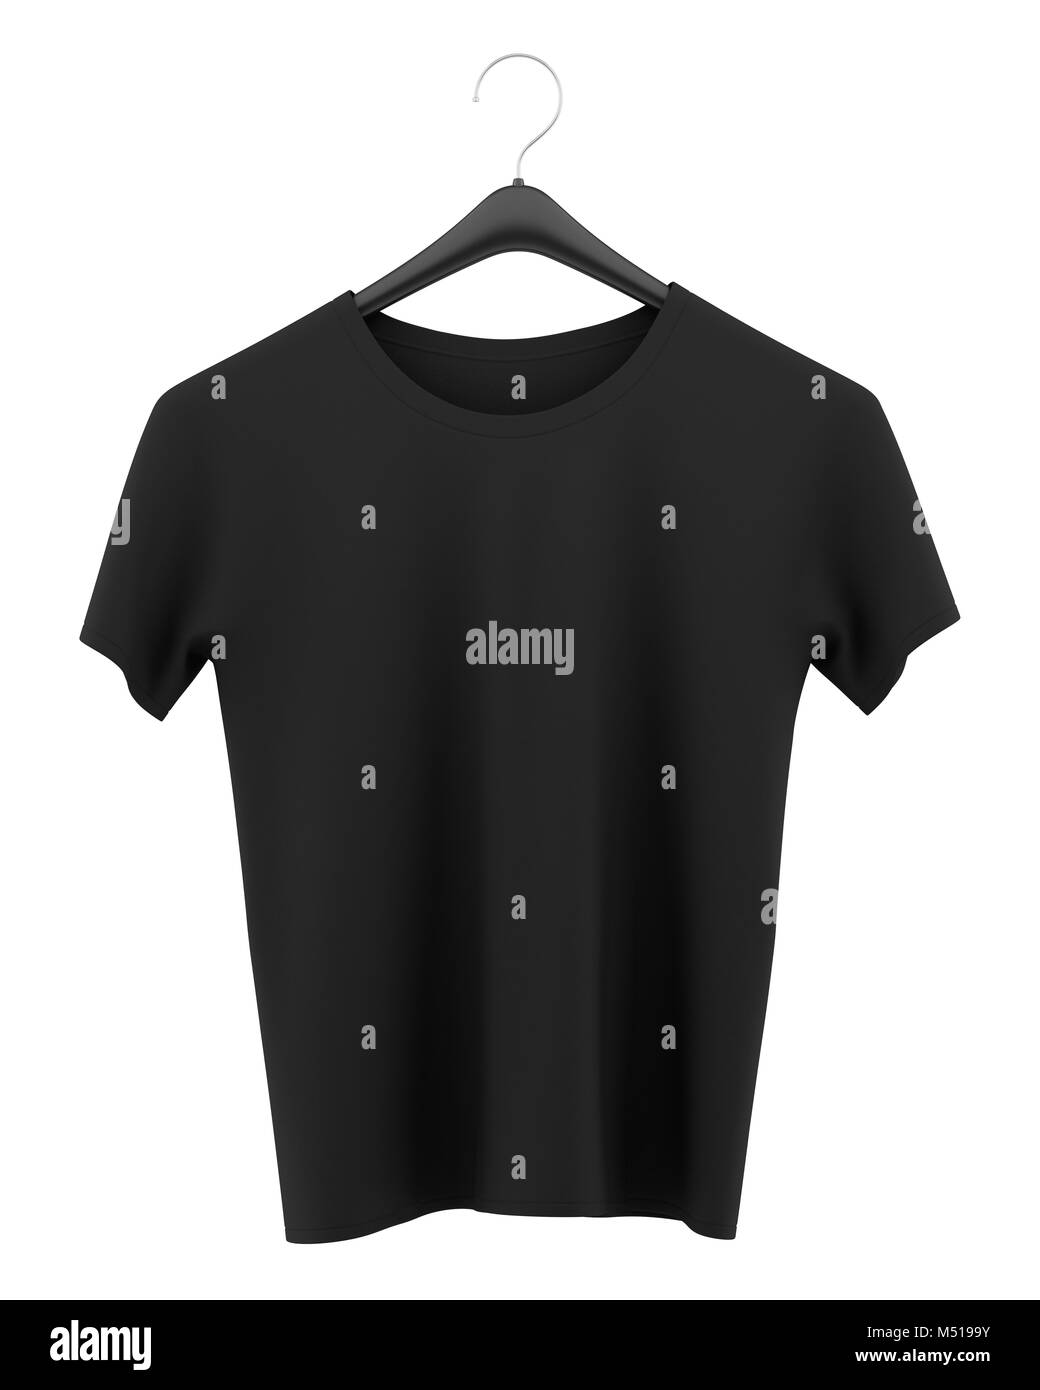 https://c8.alamy.com/comp/M5199Y/black-t-shirt-on-clothing-hanger-isolated-on-white-background-M5199Y.jpg